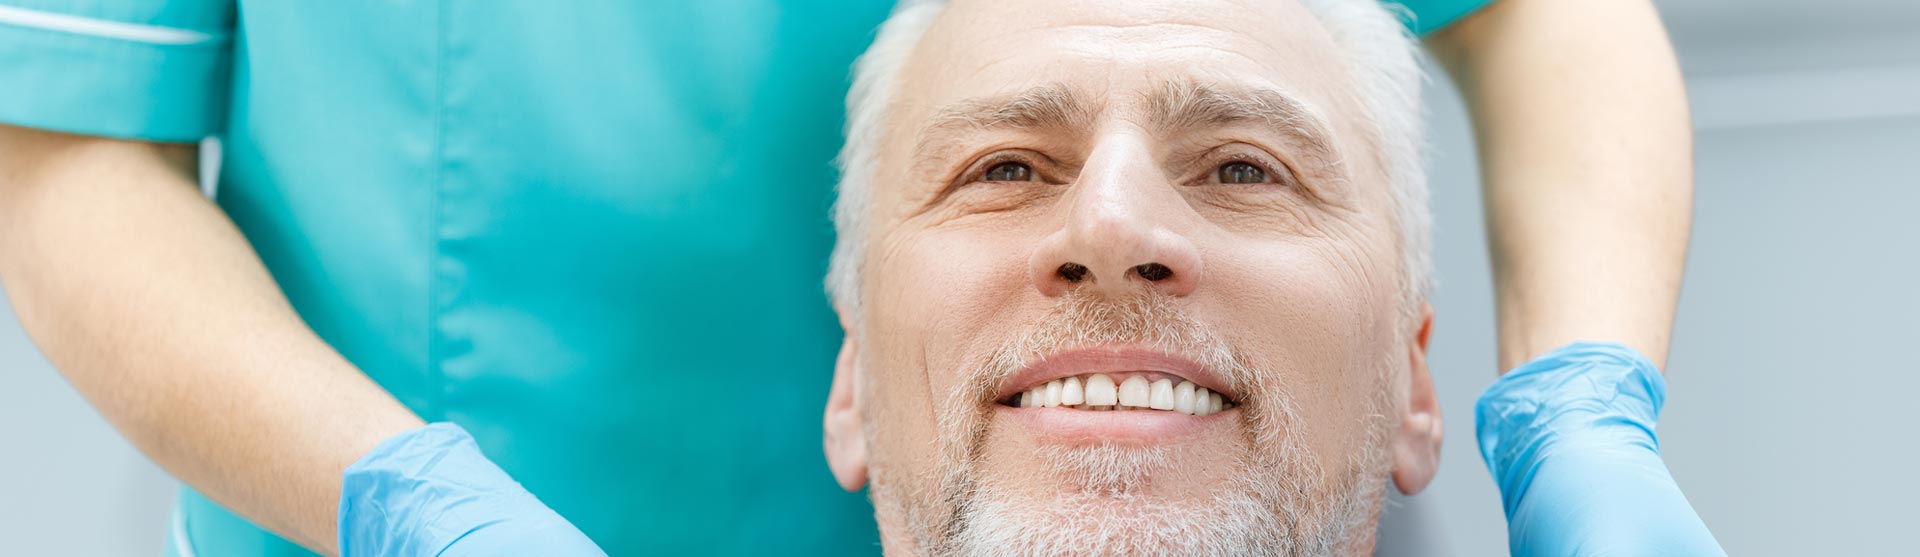 Happy middle aged man after having dental implants treatment